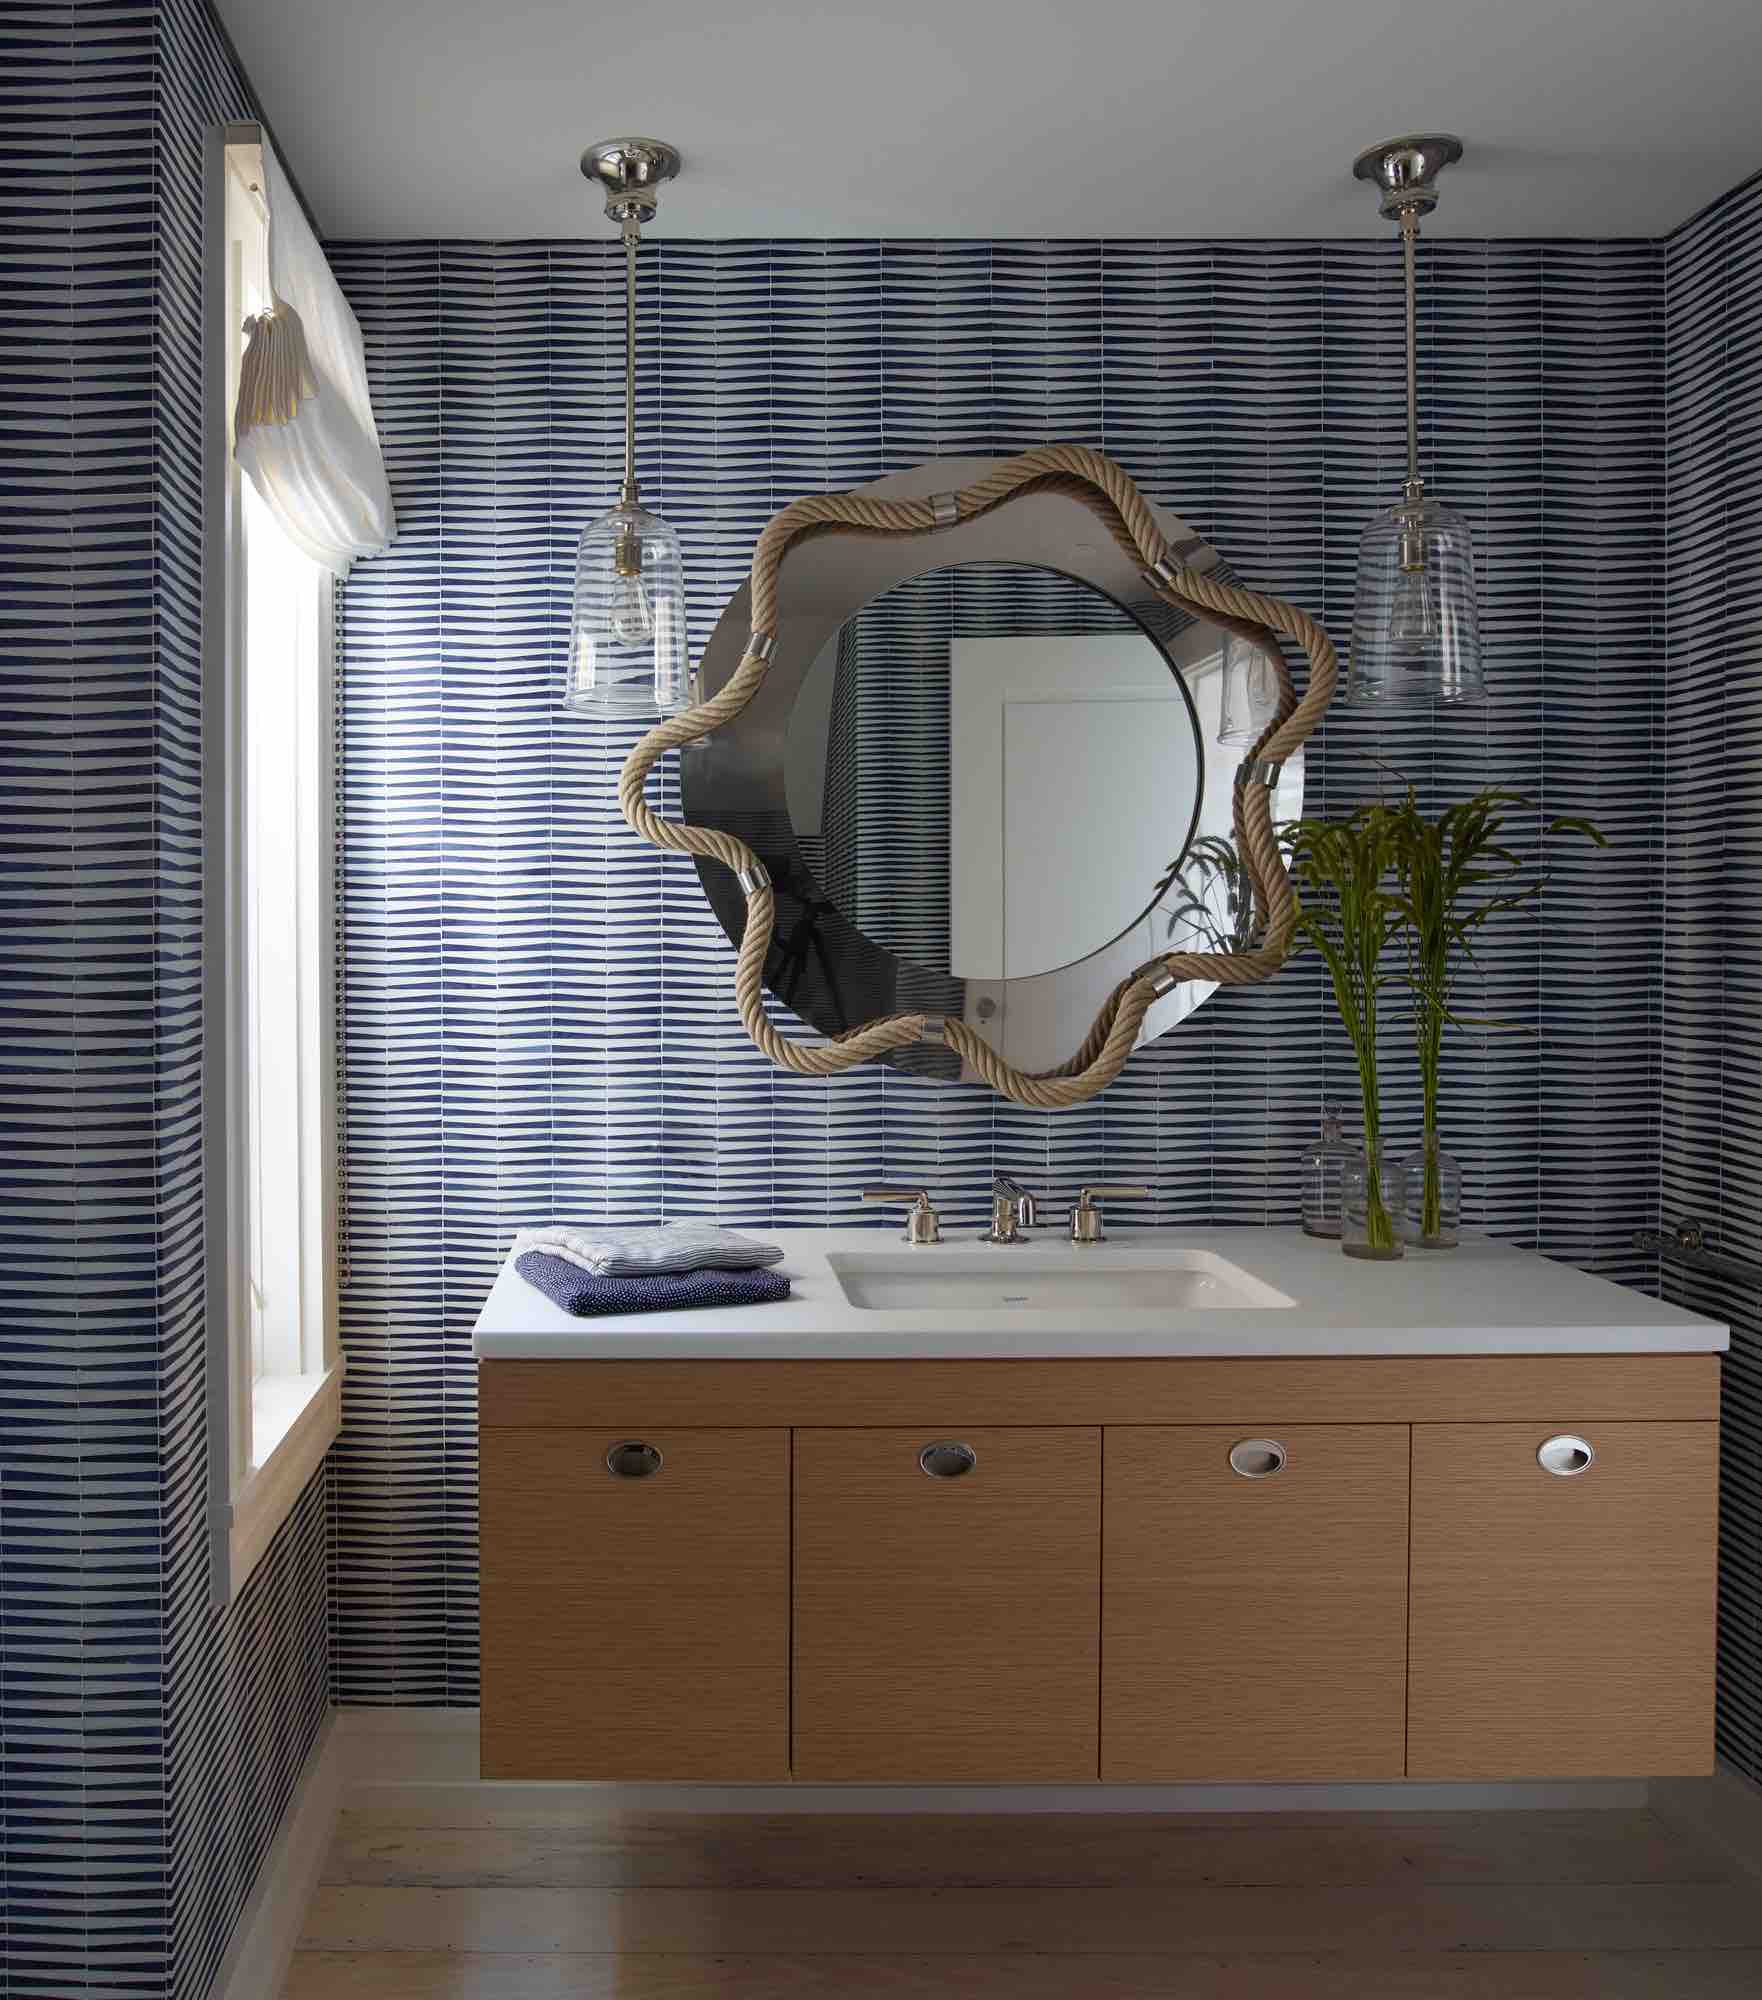 Honed Thassos marble and Lapis Lazuli stone wall tile create a striped pattern in this Hamptons powder room designed by Carol Egan.  Handblown Glass Henry Pendants by Waterworks flank a decorative mirror with rope and nickel accents designed by Thomas Boog, low profile Henry Faucet by Waterworks can be seen on the oak and white marble vanity.